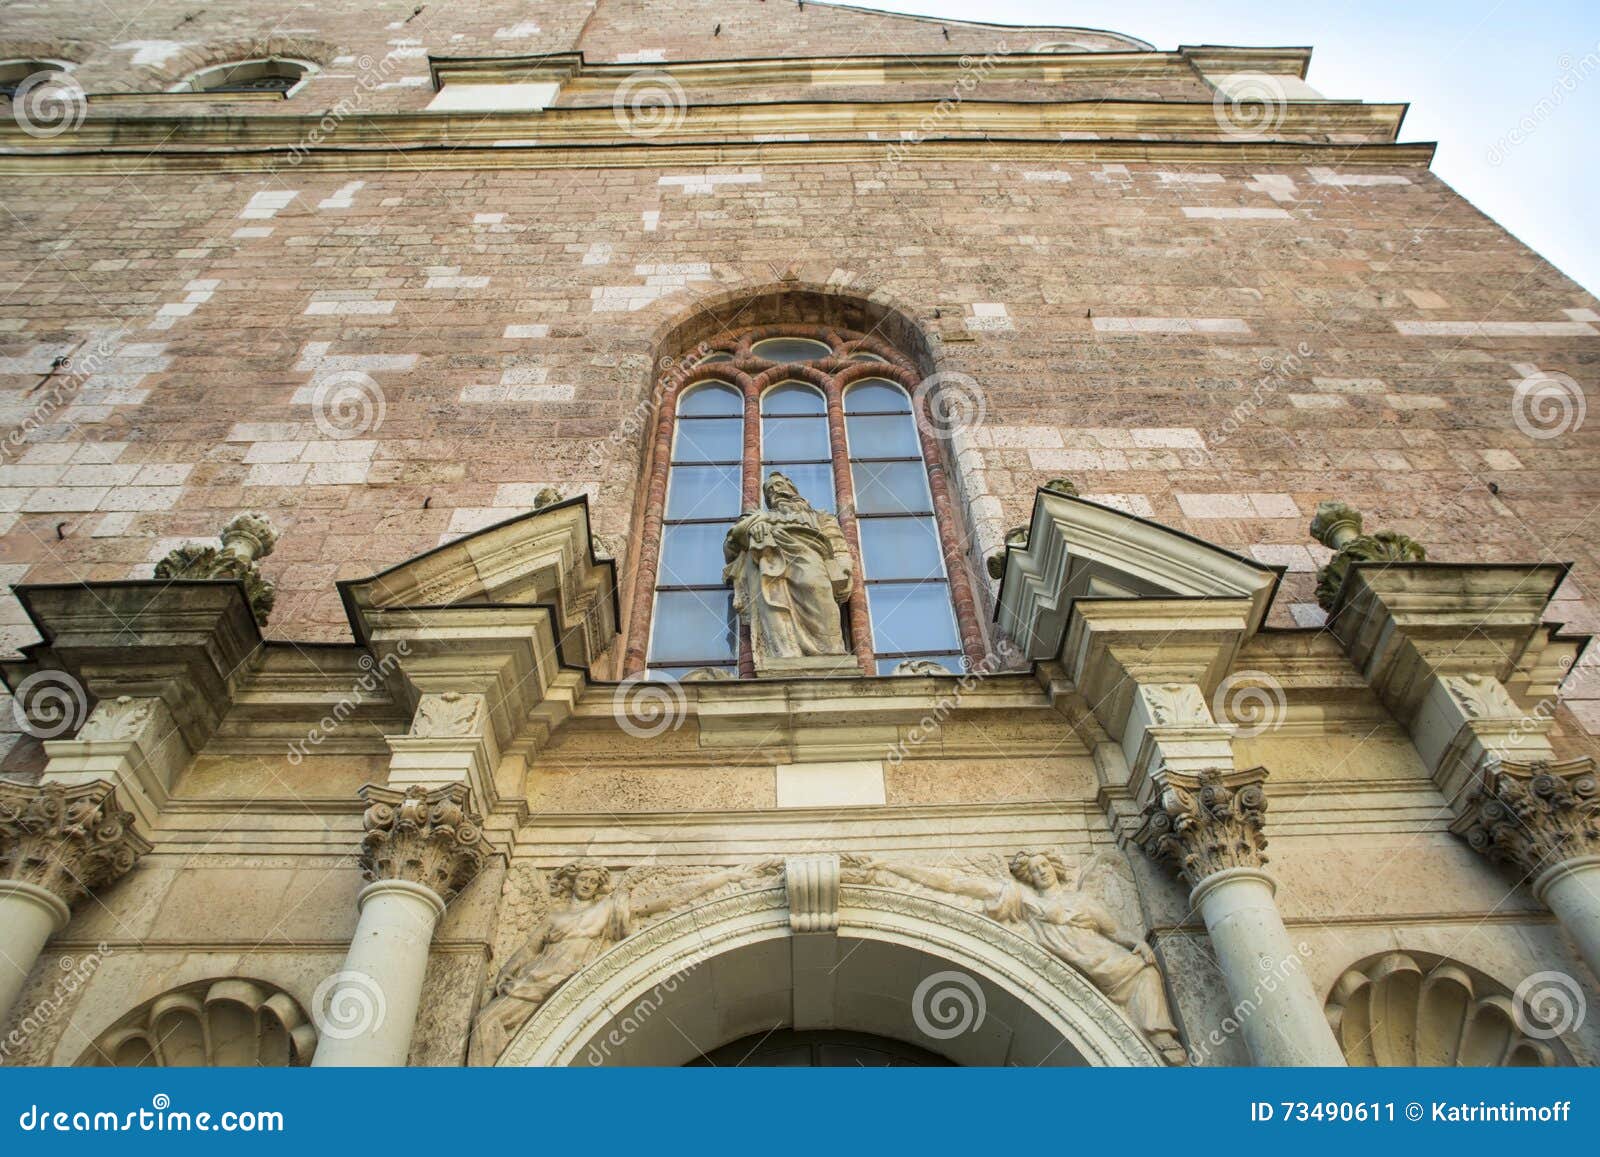 architectural details of saint pyotr's church - cathedral church of roman catholic diocese of riga, latvia